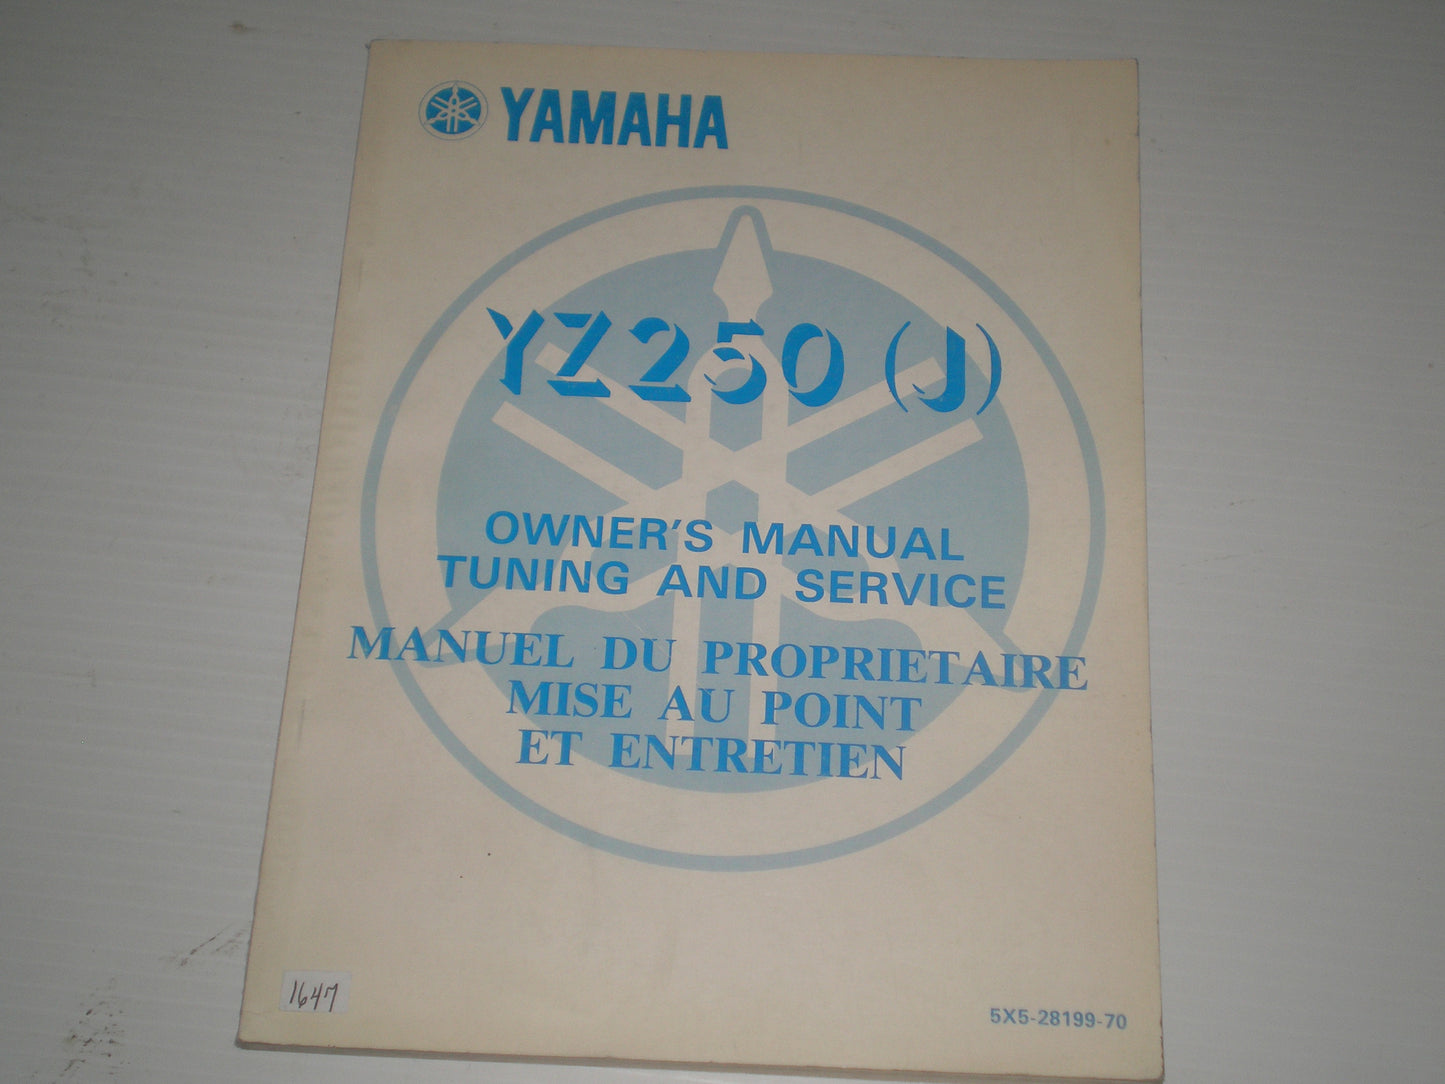 YAMAHA YZ250 J  Competition Motocross  1982  Owner's Tuning & Service Manual  5X5-28199-70  #1647